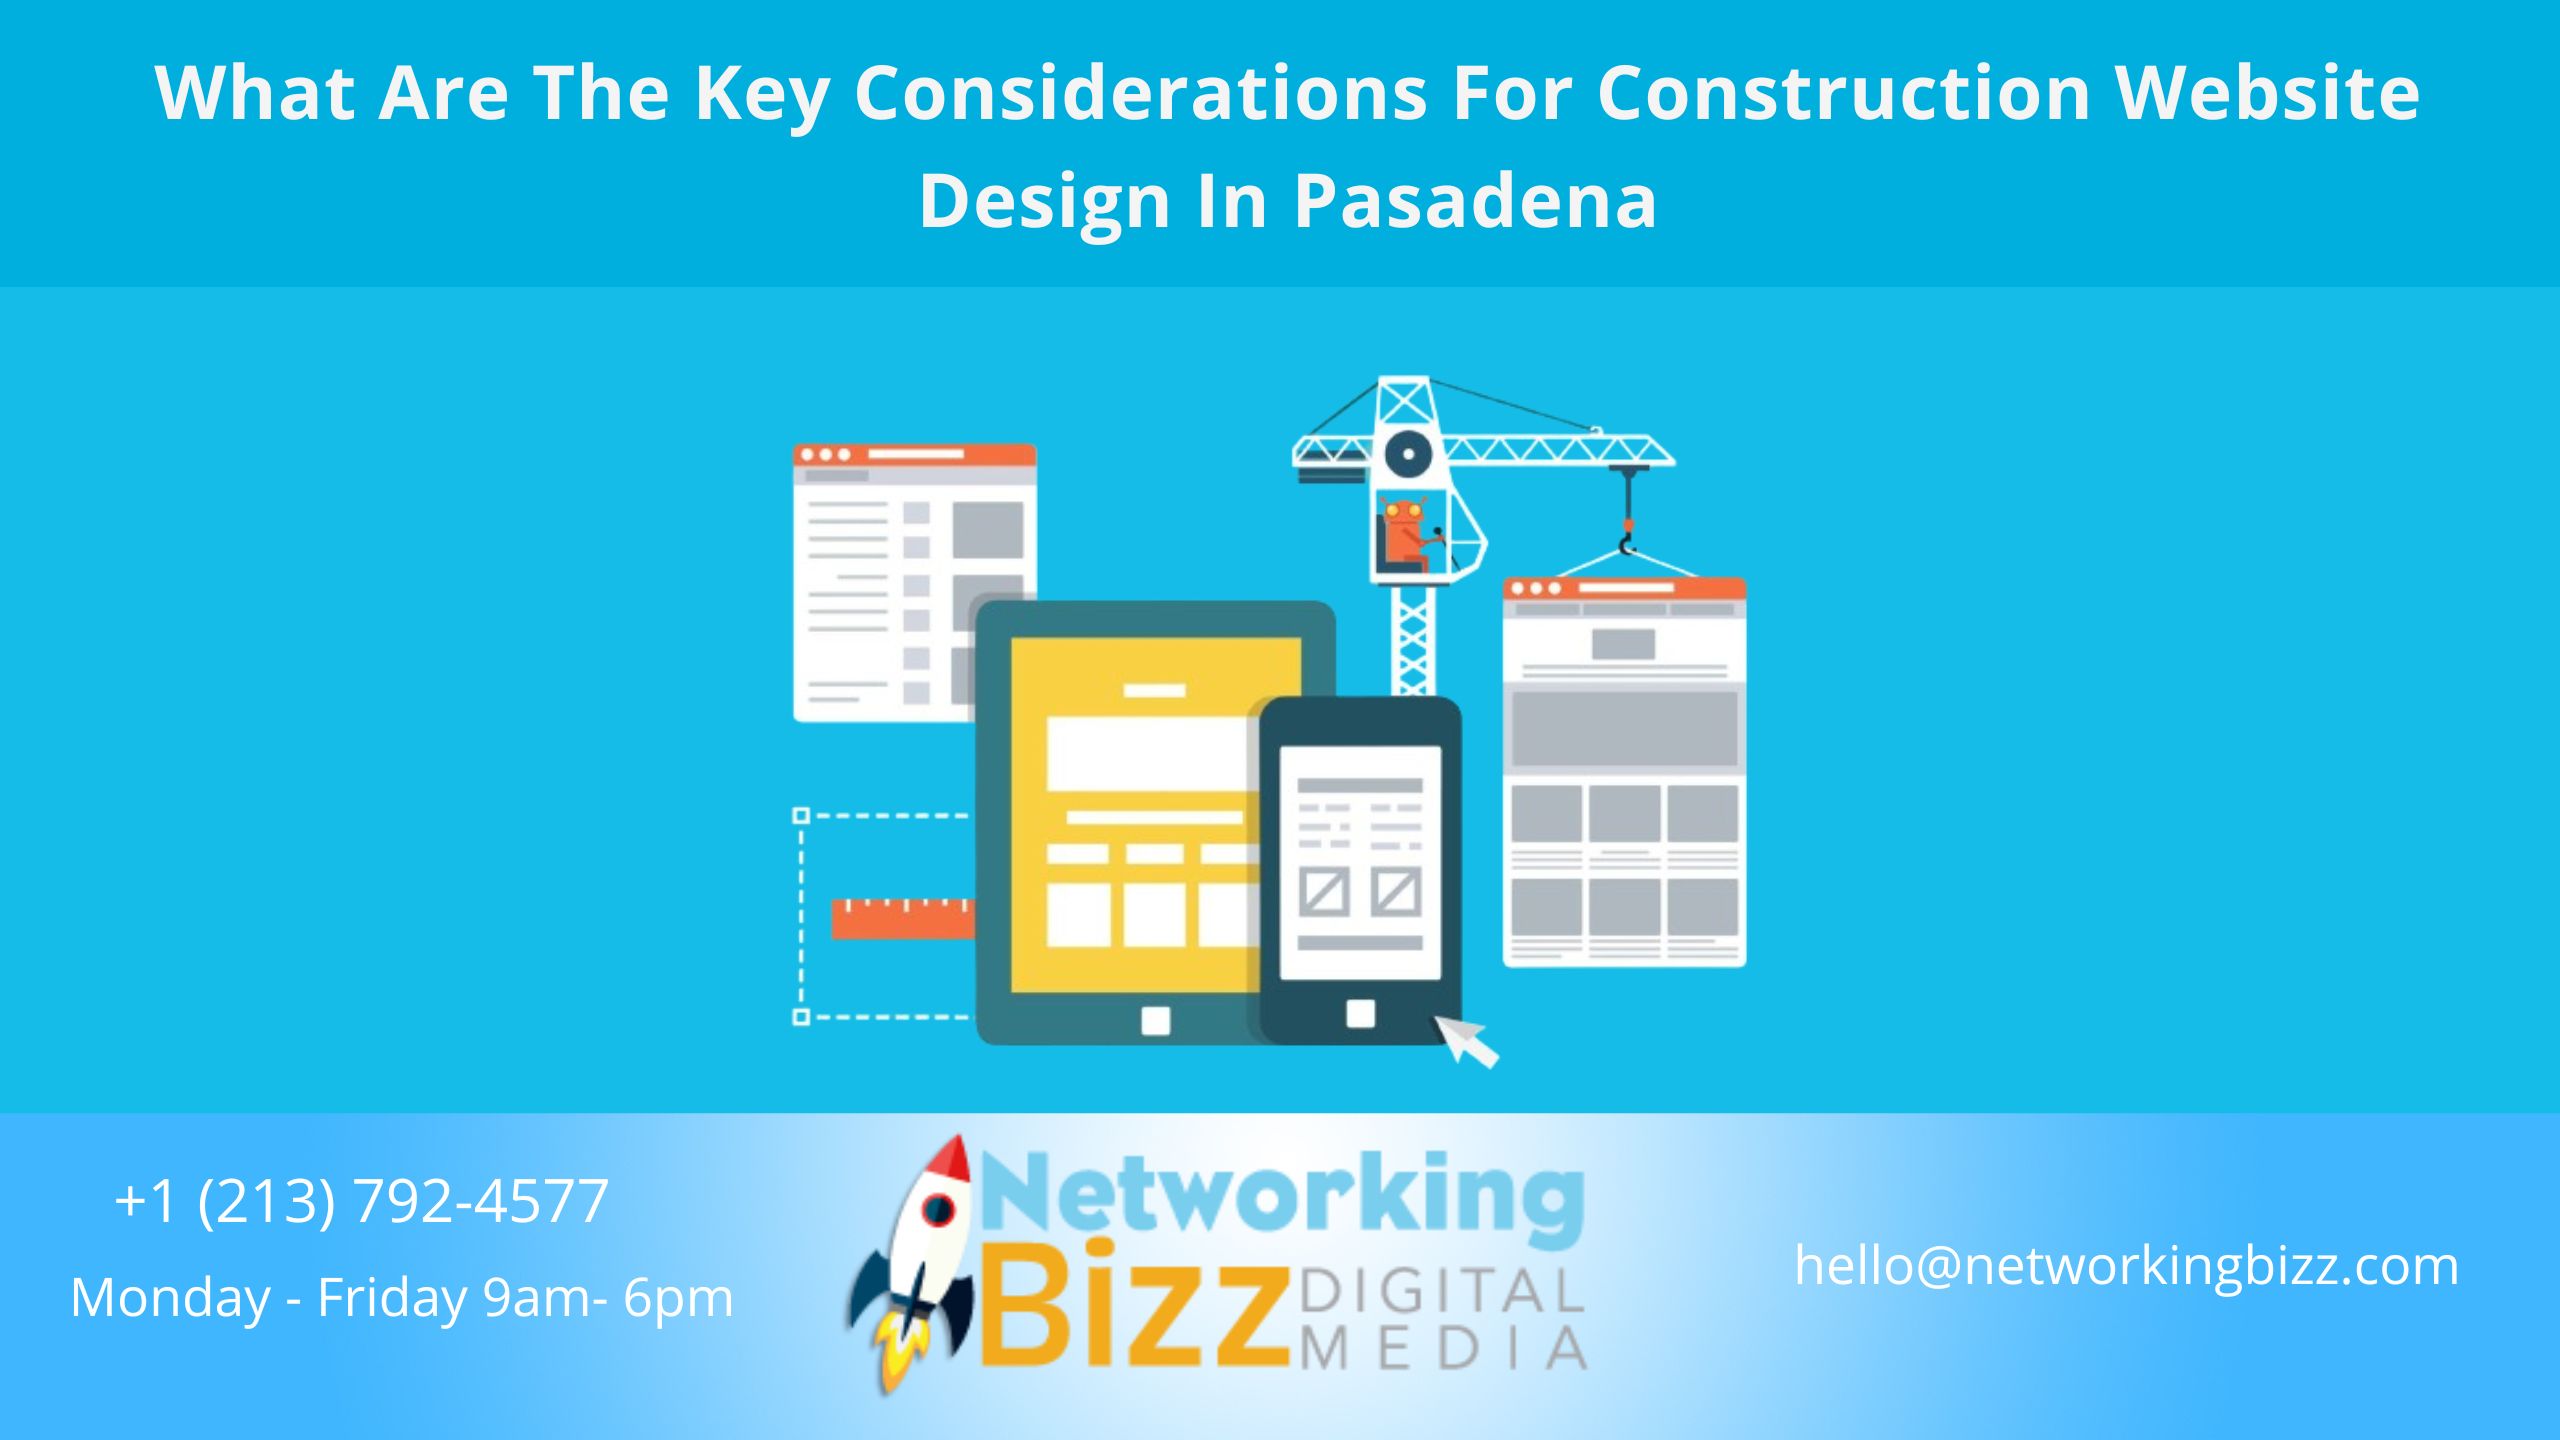 What Are The Key Considerations For Construction Website Design In Pasadena